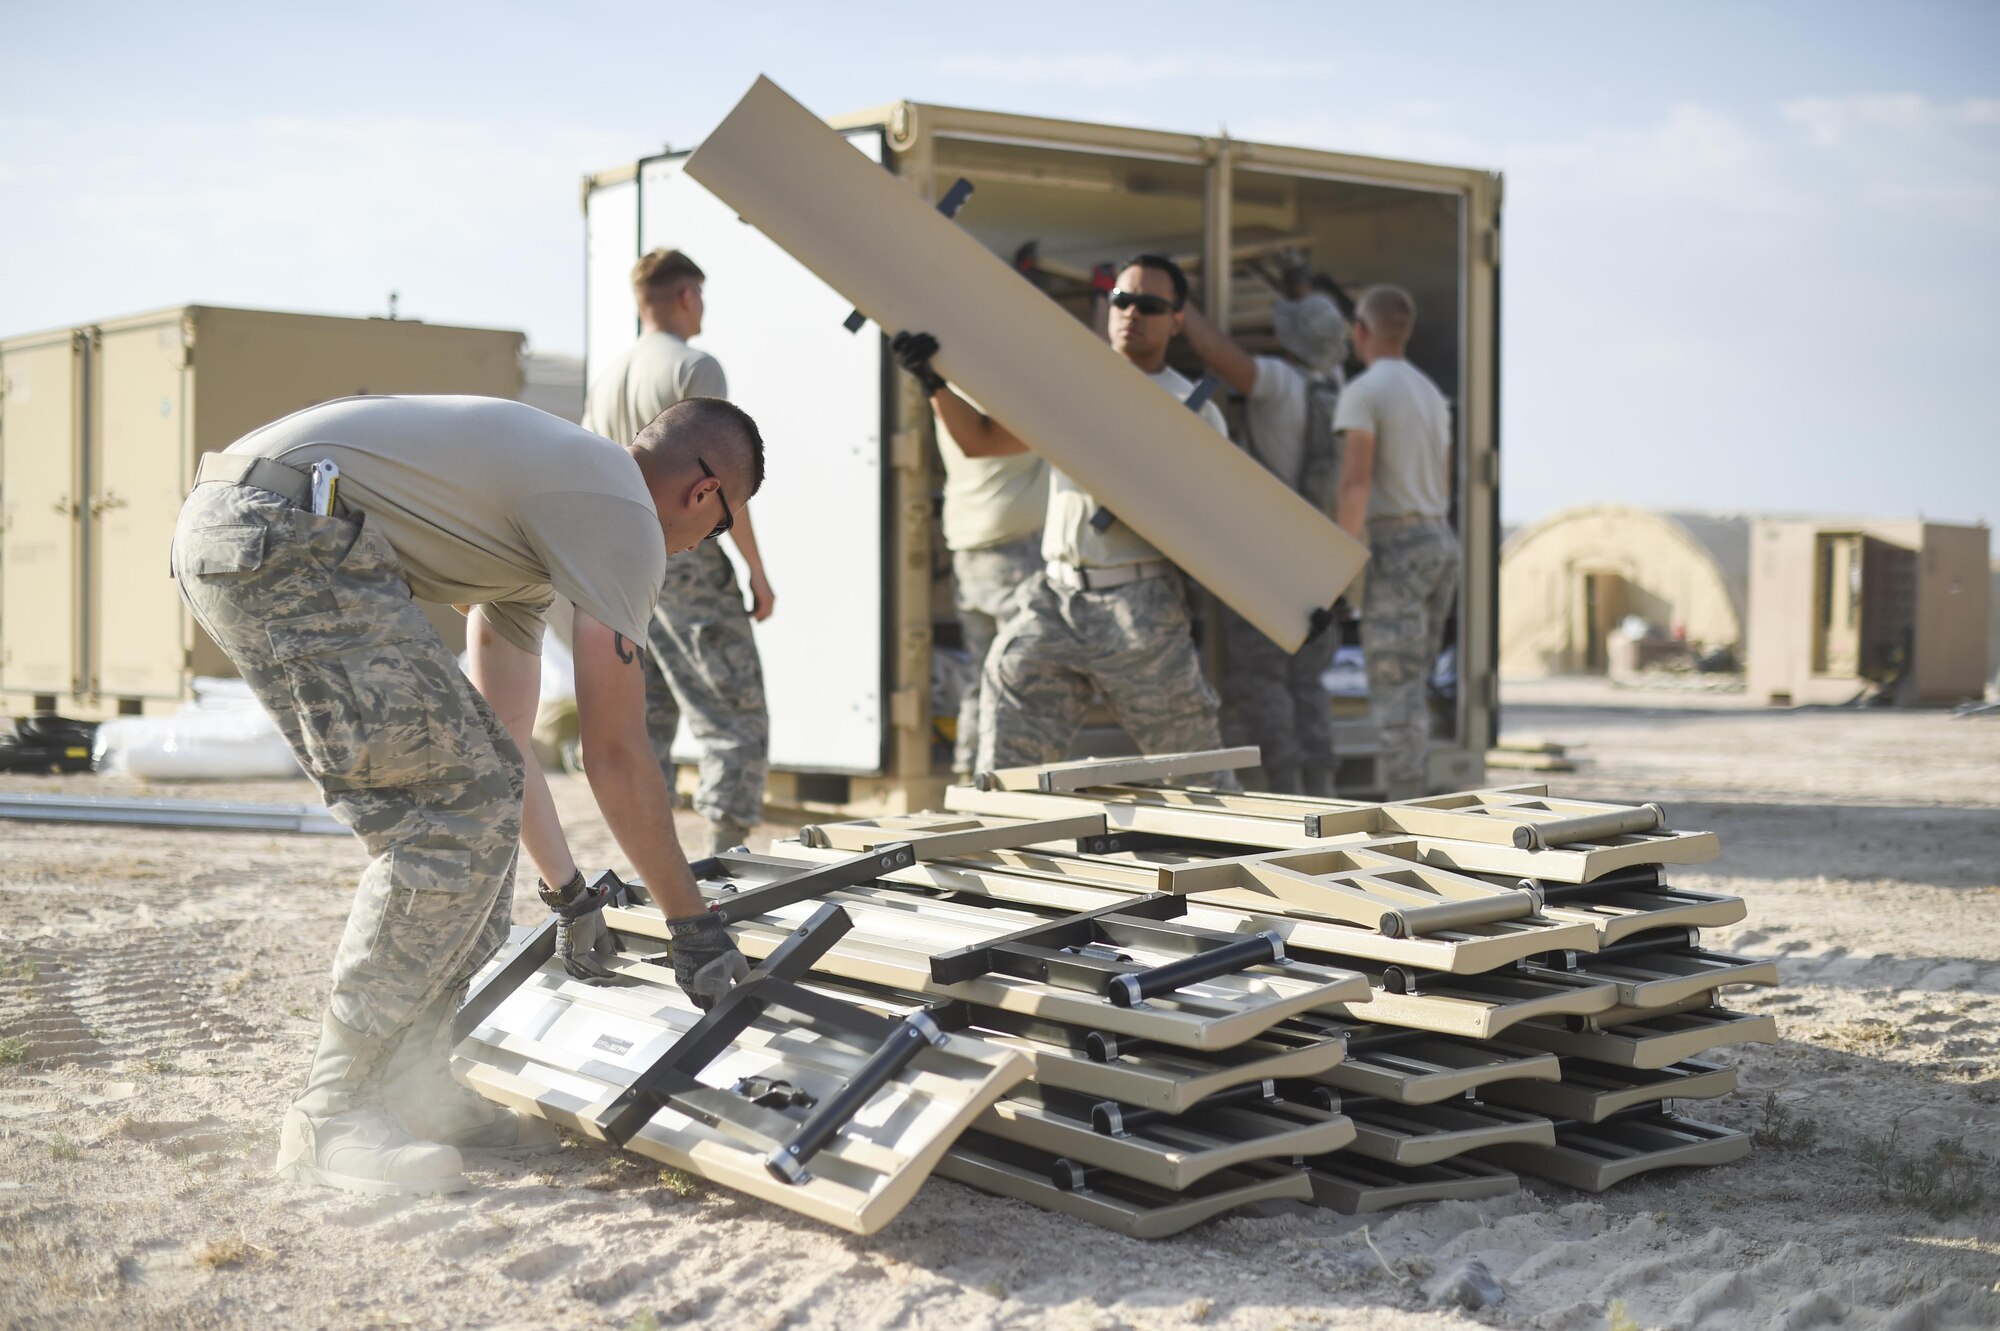 Airmen from the 49th Materiel Maintenance Group and the 49th Civil Engineer Squadron work together to unload benches used for seating inside a dining facility being built during a three day joint training exercise at Holloman Air Base, N.M. on June 7. Airmen from the 49th Materiel Maintenance Group and the 49th Civil Engineer Squadron work together to form the Base Expeditionary Airfield Resources team. The BARE Base team is comprised of several Air Force specialties including aerospace ground equipment, structures, heating/air conditioning and electrical, as well as lodging, industrial and airfield capabilities at various locations throughout the world. Members of BEAR base build hangars in preparation to deploy at a moments notice. (Last names being withheld due to operational requirements. U.S. Air Force Photo by Staff Sgt. Stacy Moless)